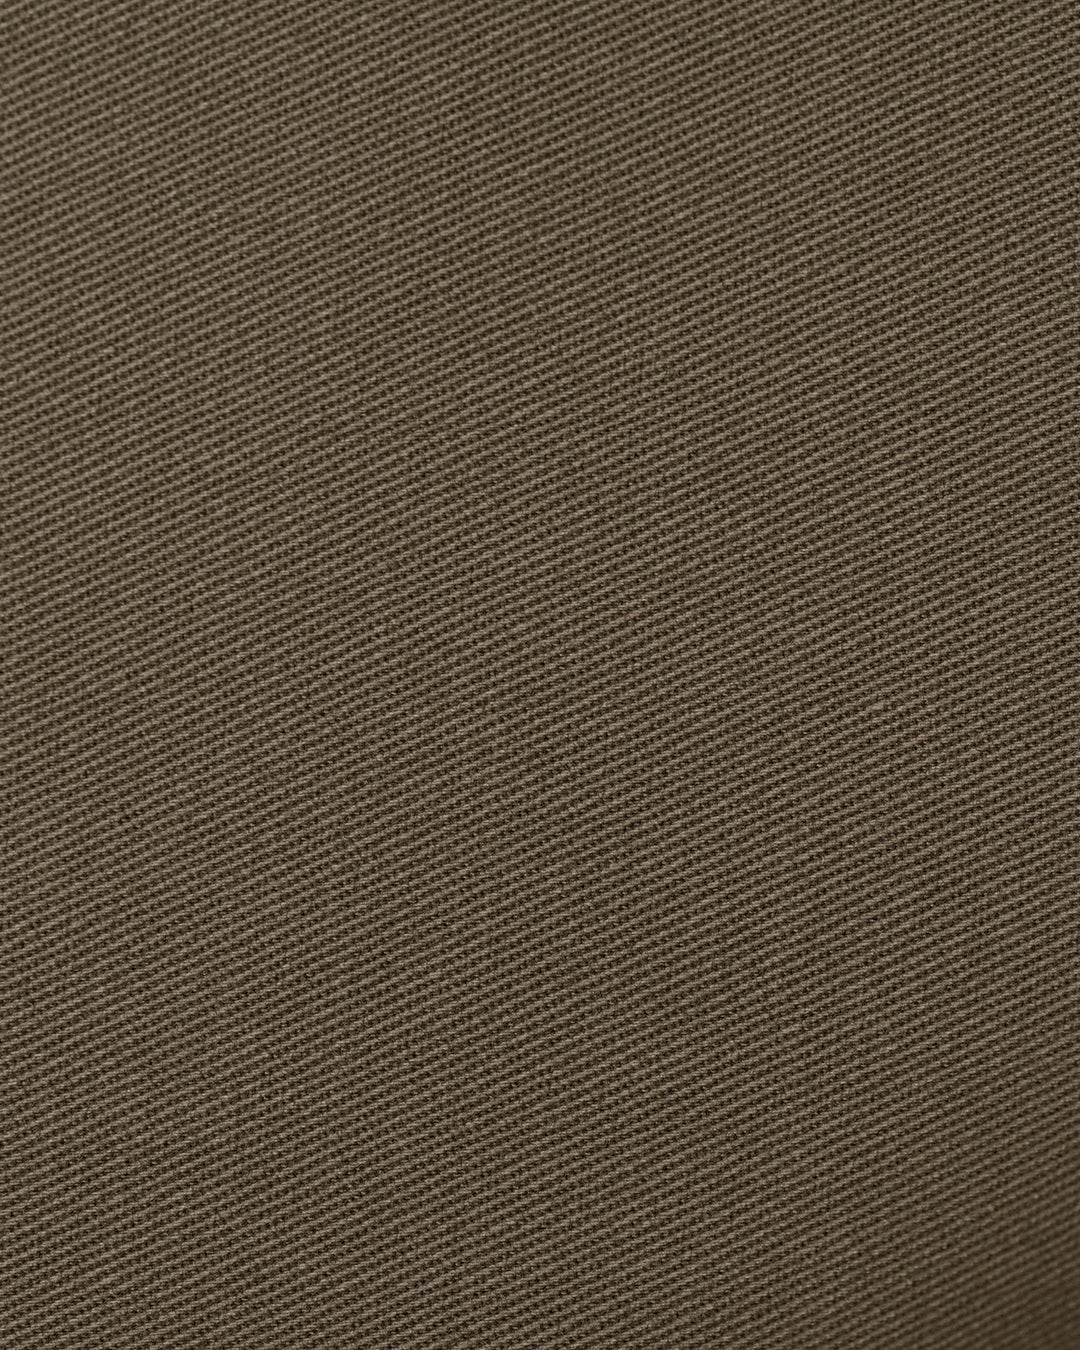 Close up view of custom Genoa Chino pants for men by Luxire in khaki brown